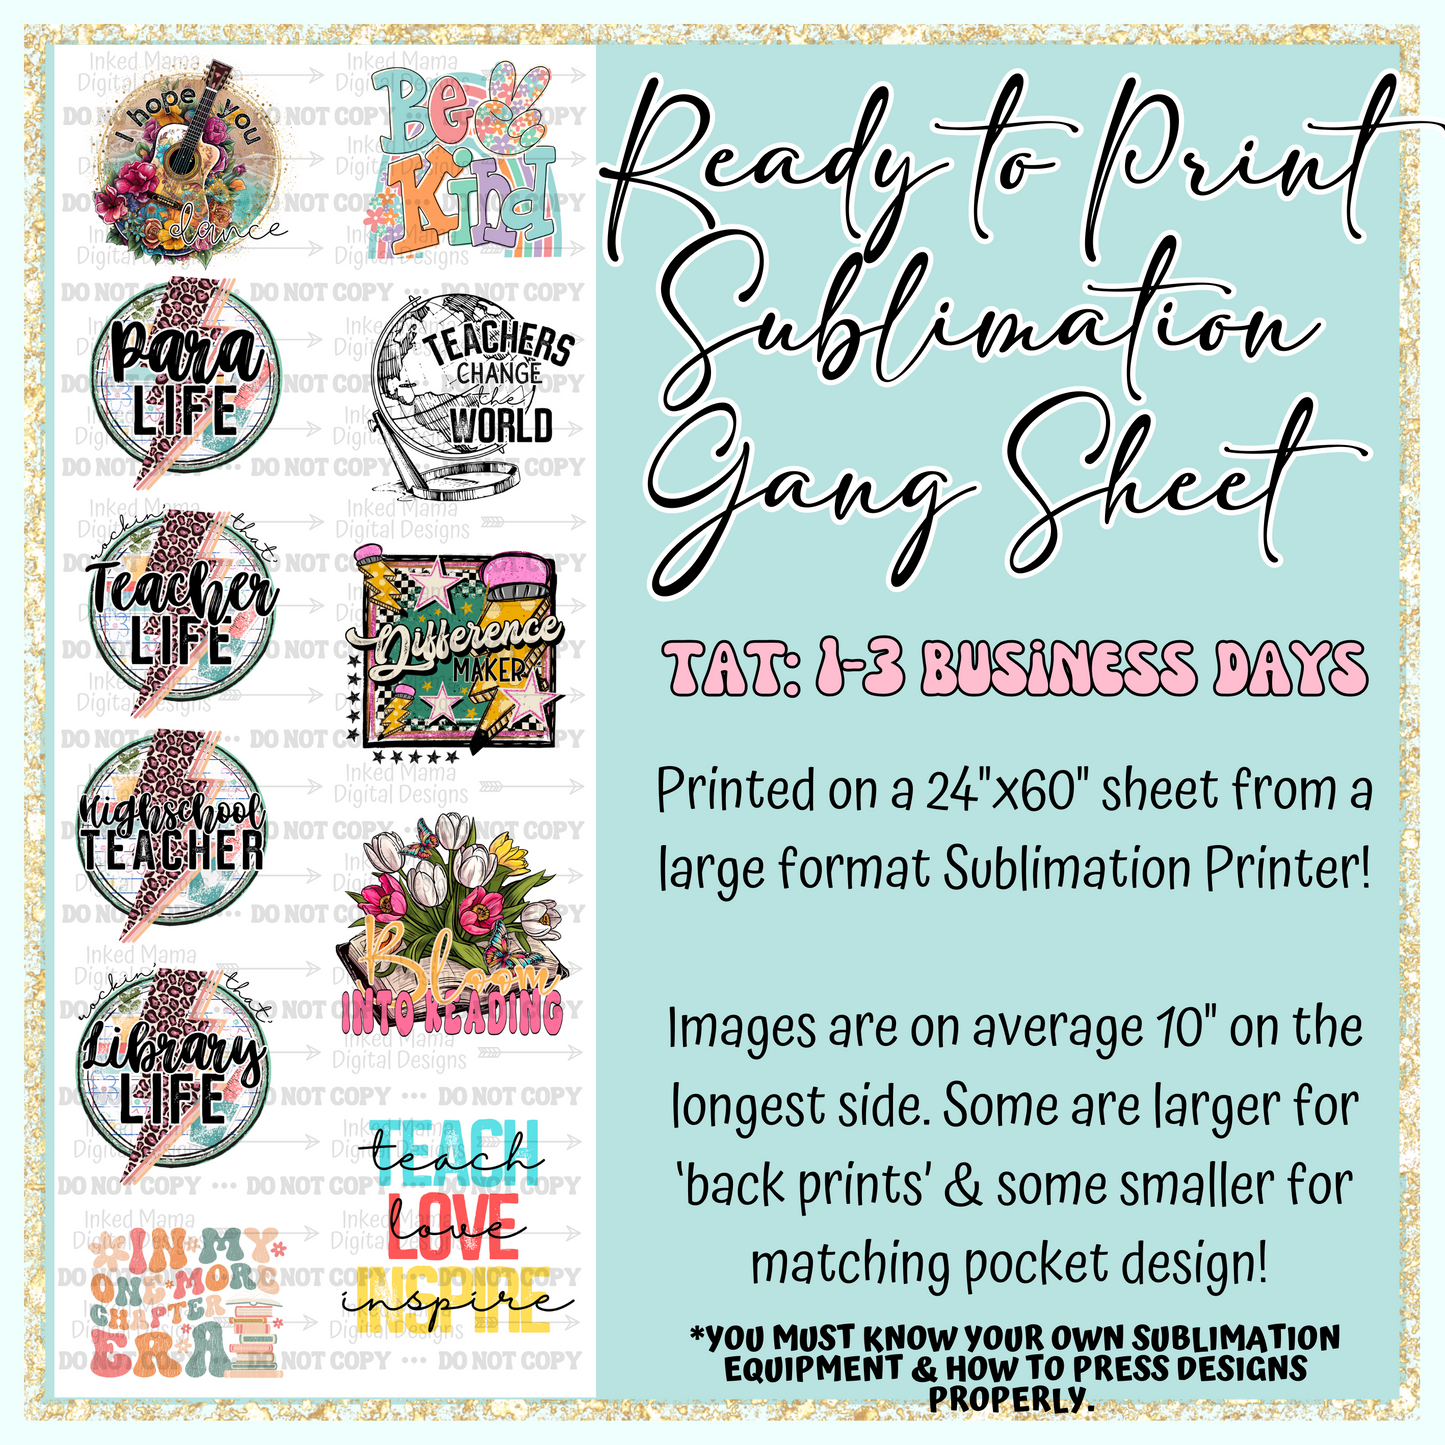 Teachers & Educators Collection | Ready to Print Sublimation Gang Sheet